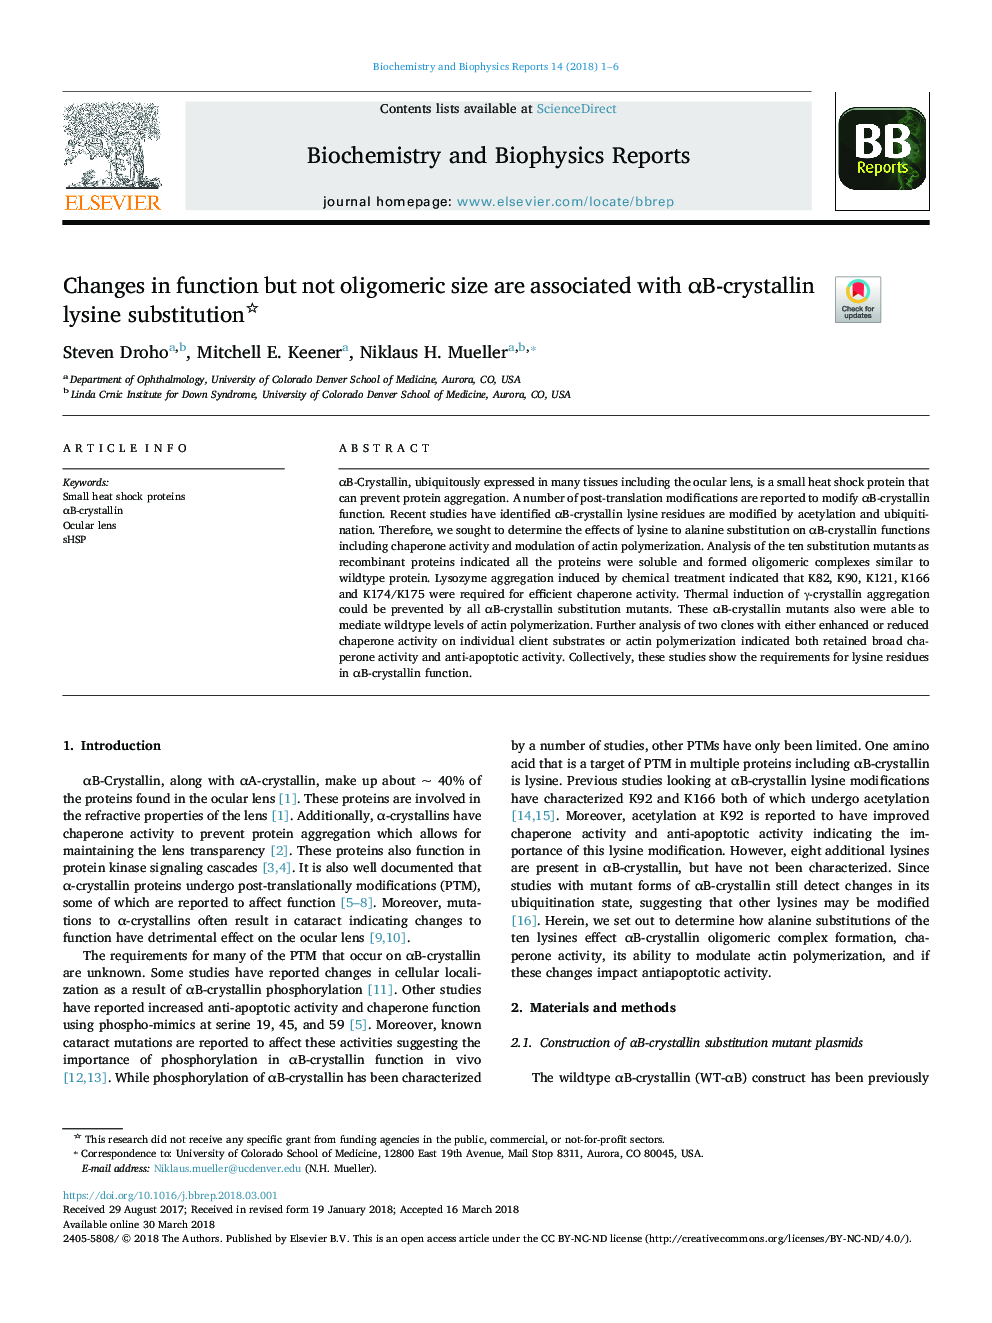 Changes in function but not oligomeric size are associated with Î±B-crystallin lysine substitution